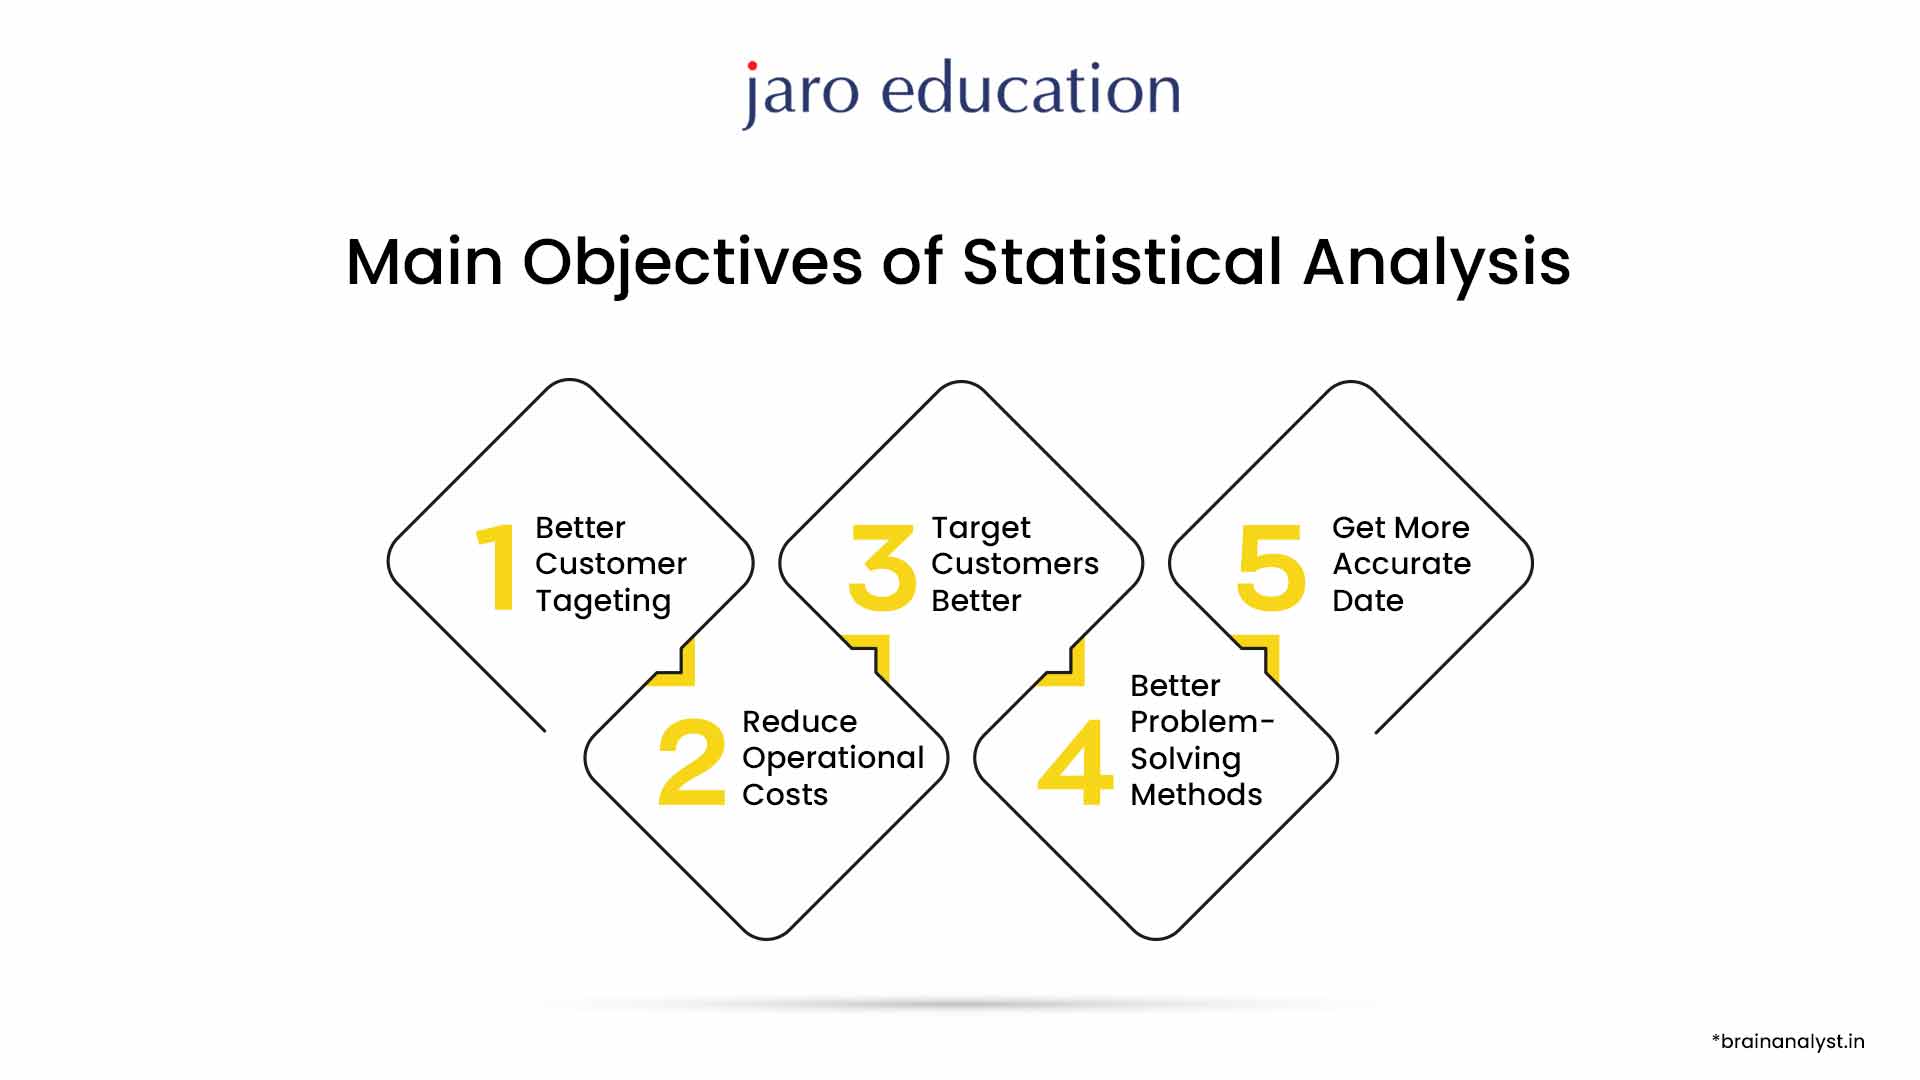 Main Objective of Statistical Analysis